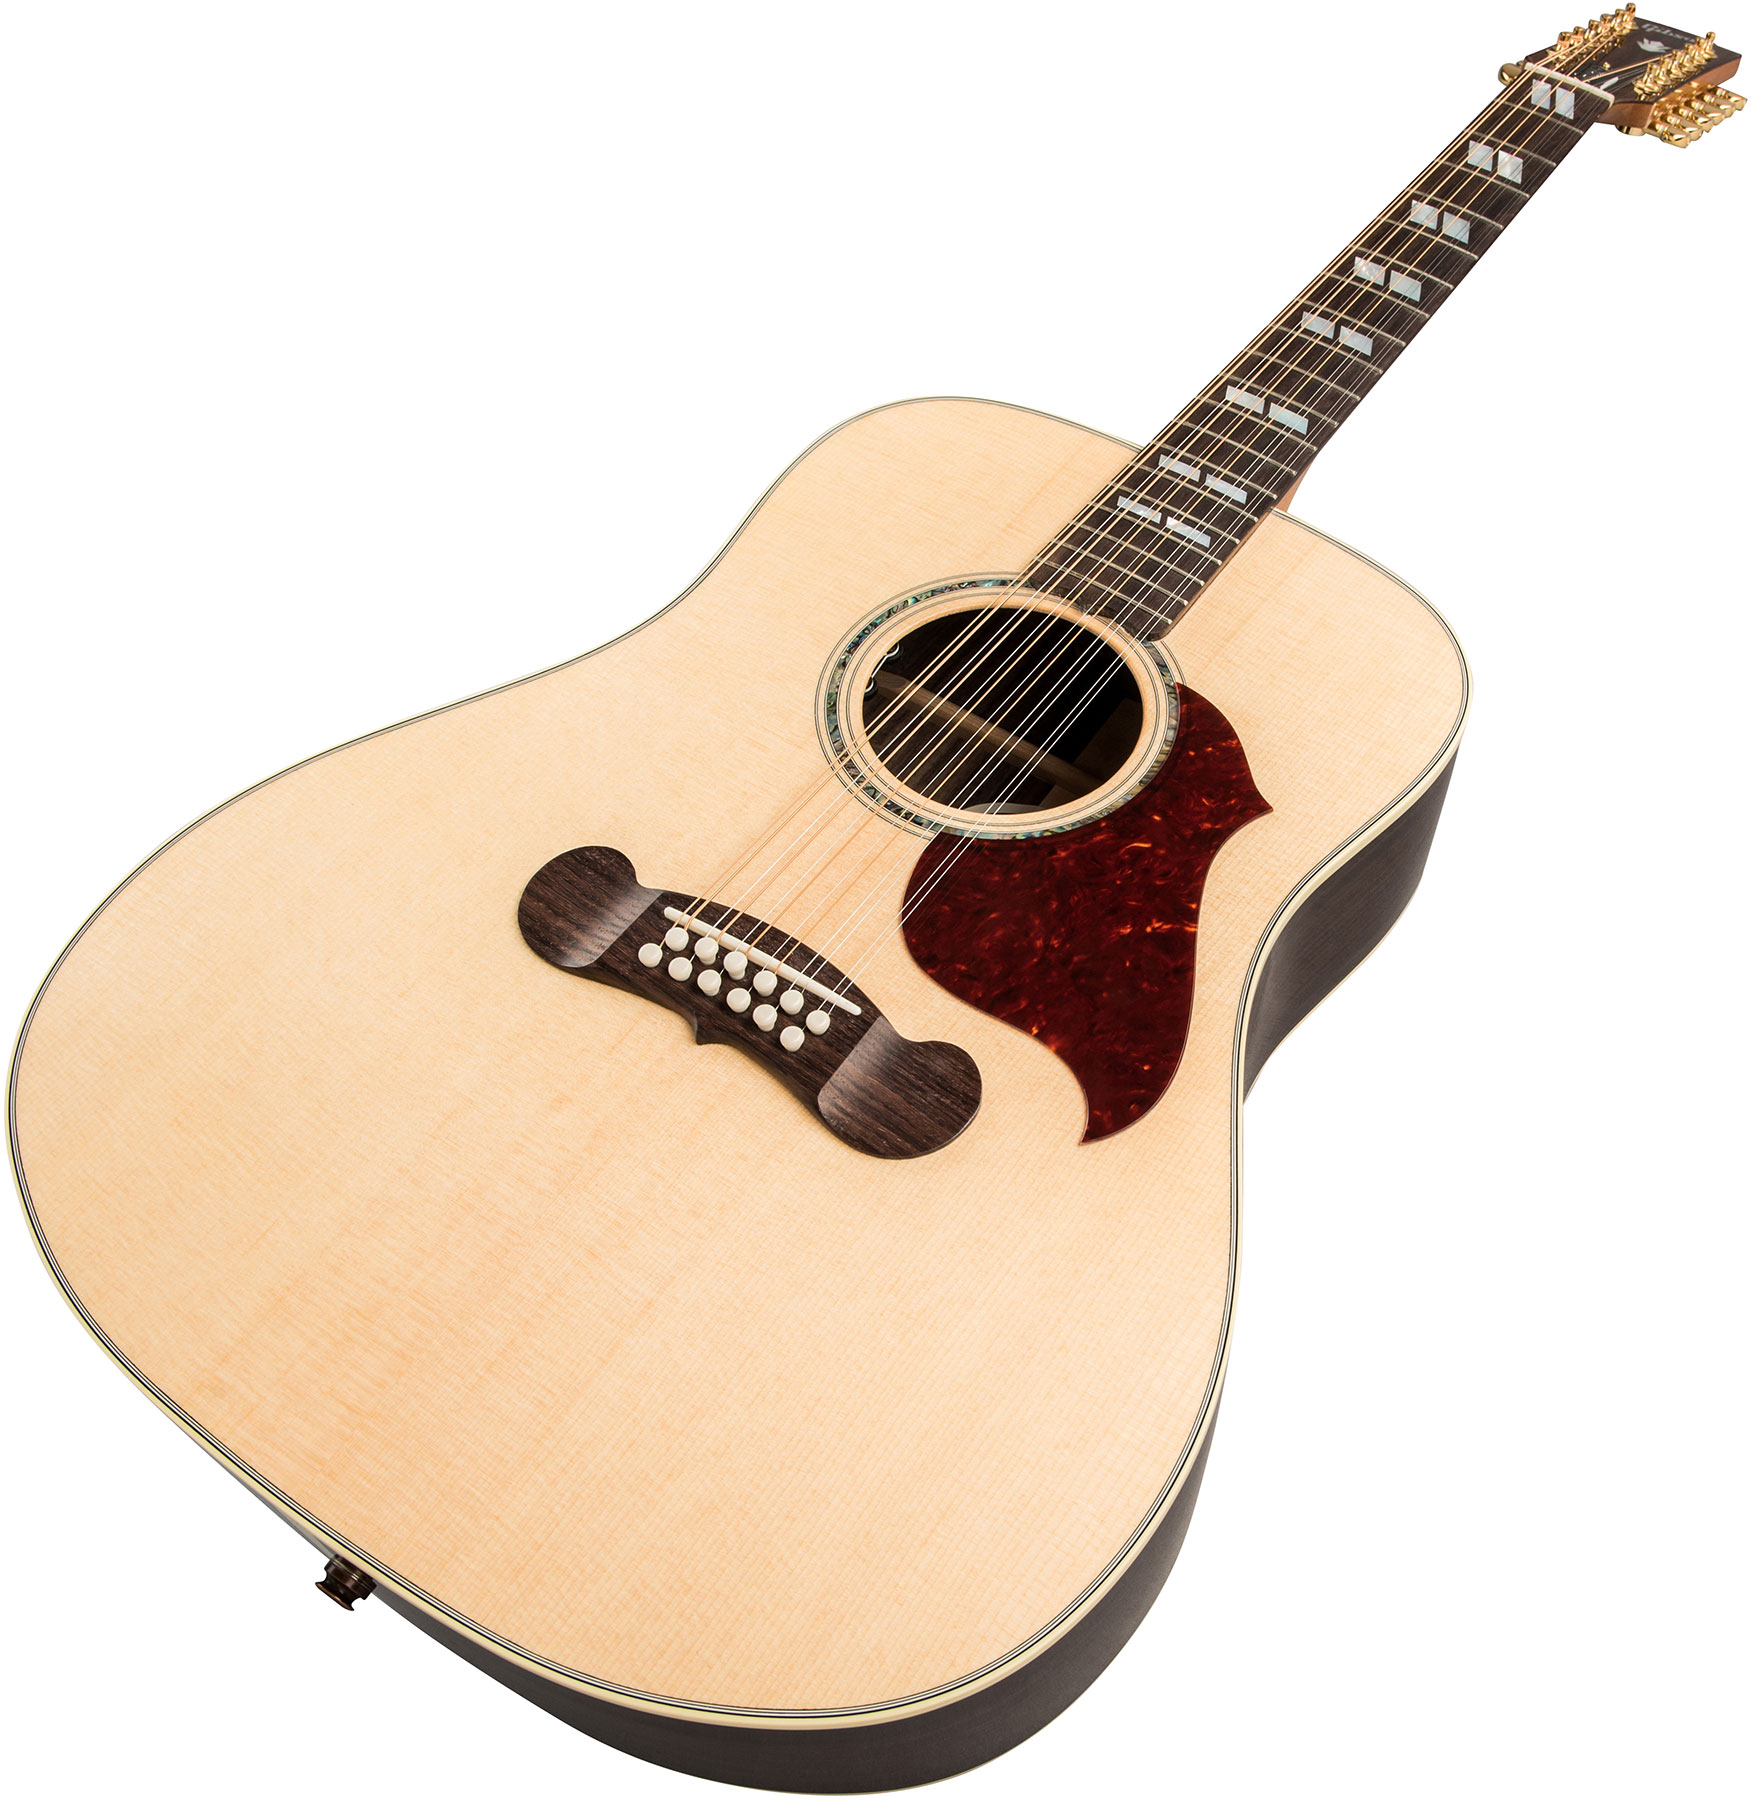 Gibson Songwriter 12-string 2019 Dreadnought 12-cordes Epicea Palissandre Rw - Antique Natural - Acoustic guitar & electro - Variation 1